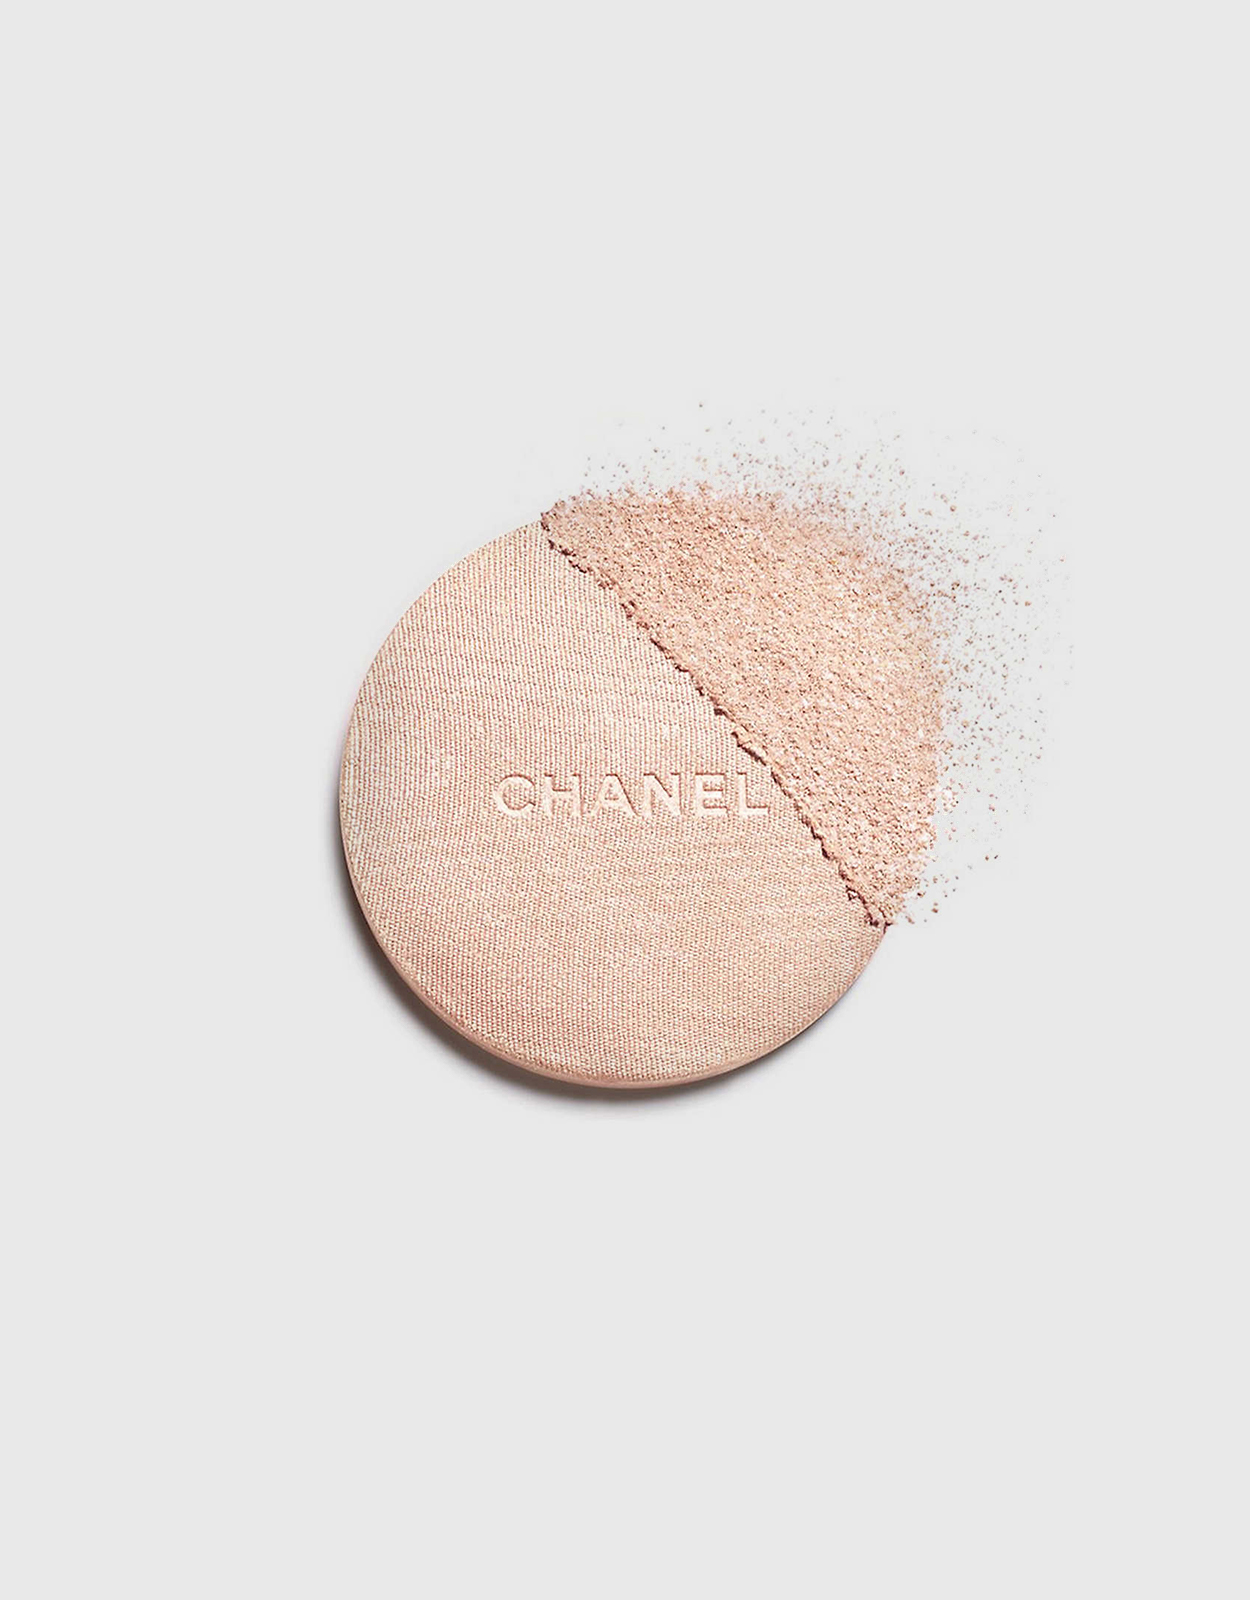 Chanel Beauty Poudre Lumiere Illuminating Powder-Rosy Gold  (Makeup,Face,Bronzer)